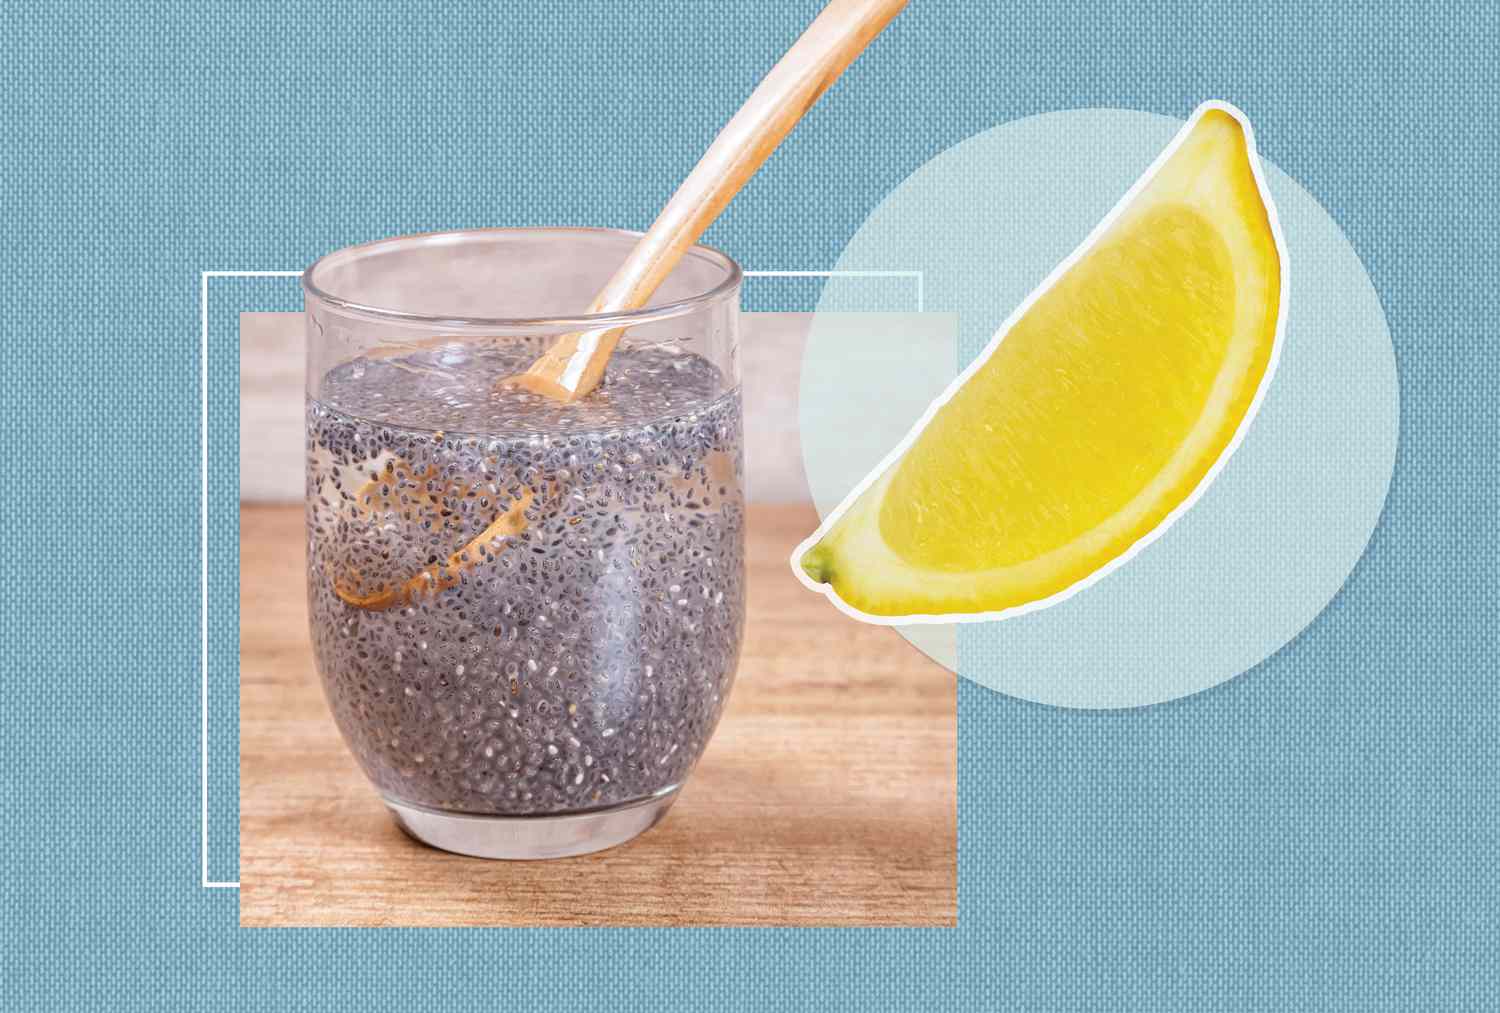 How To Consume Chia Seeds For Constipation